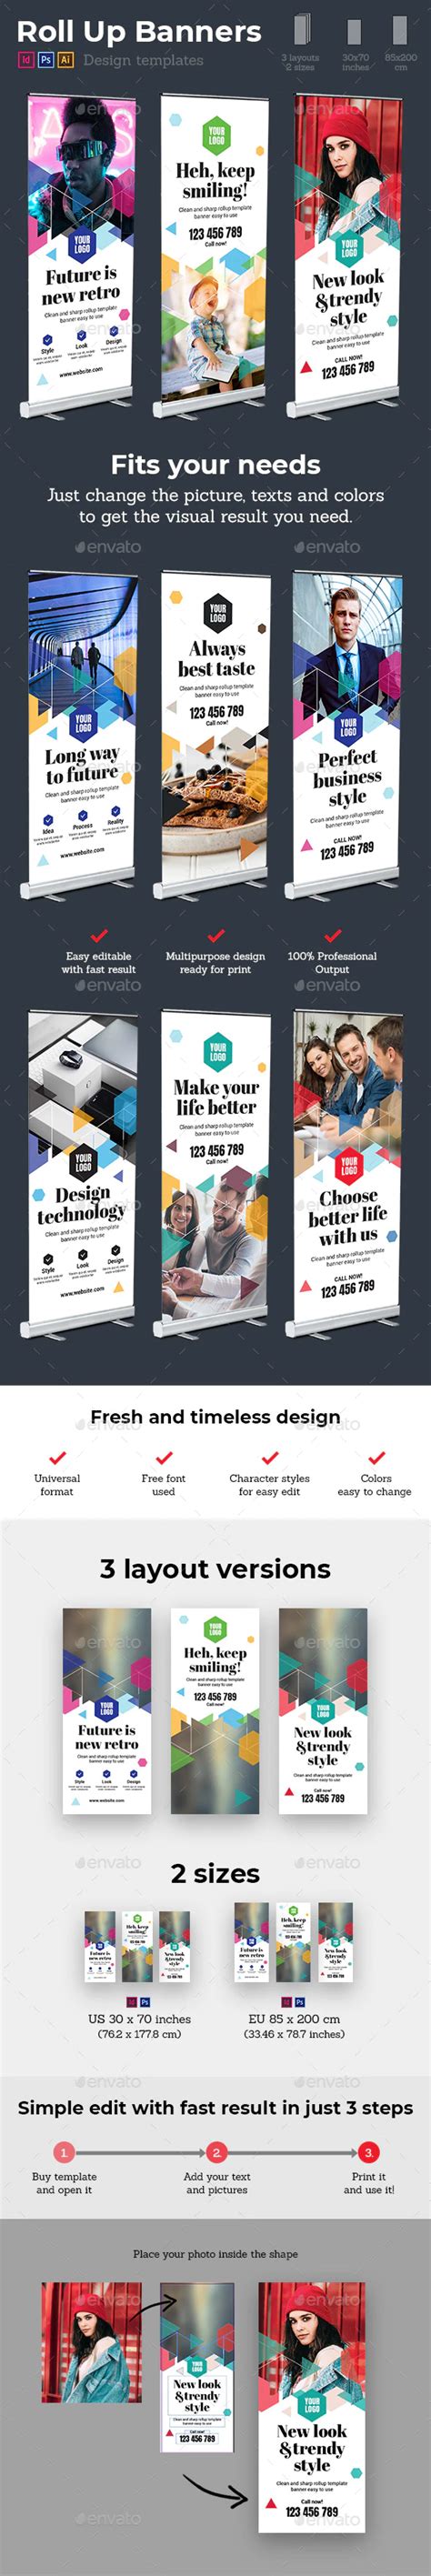 Colorful Geometric 3x Rollup Stand Banner Display Template In Indesign